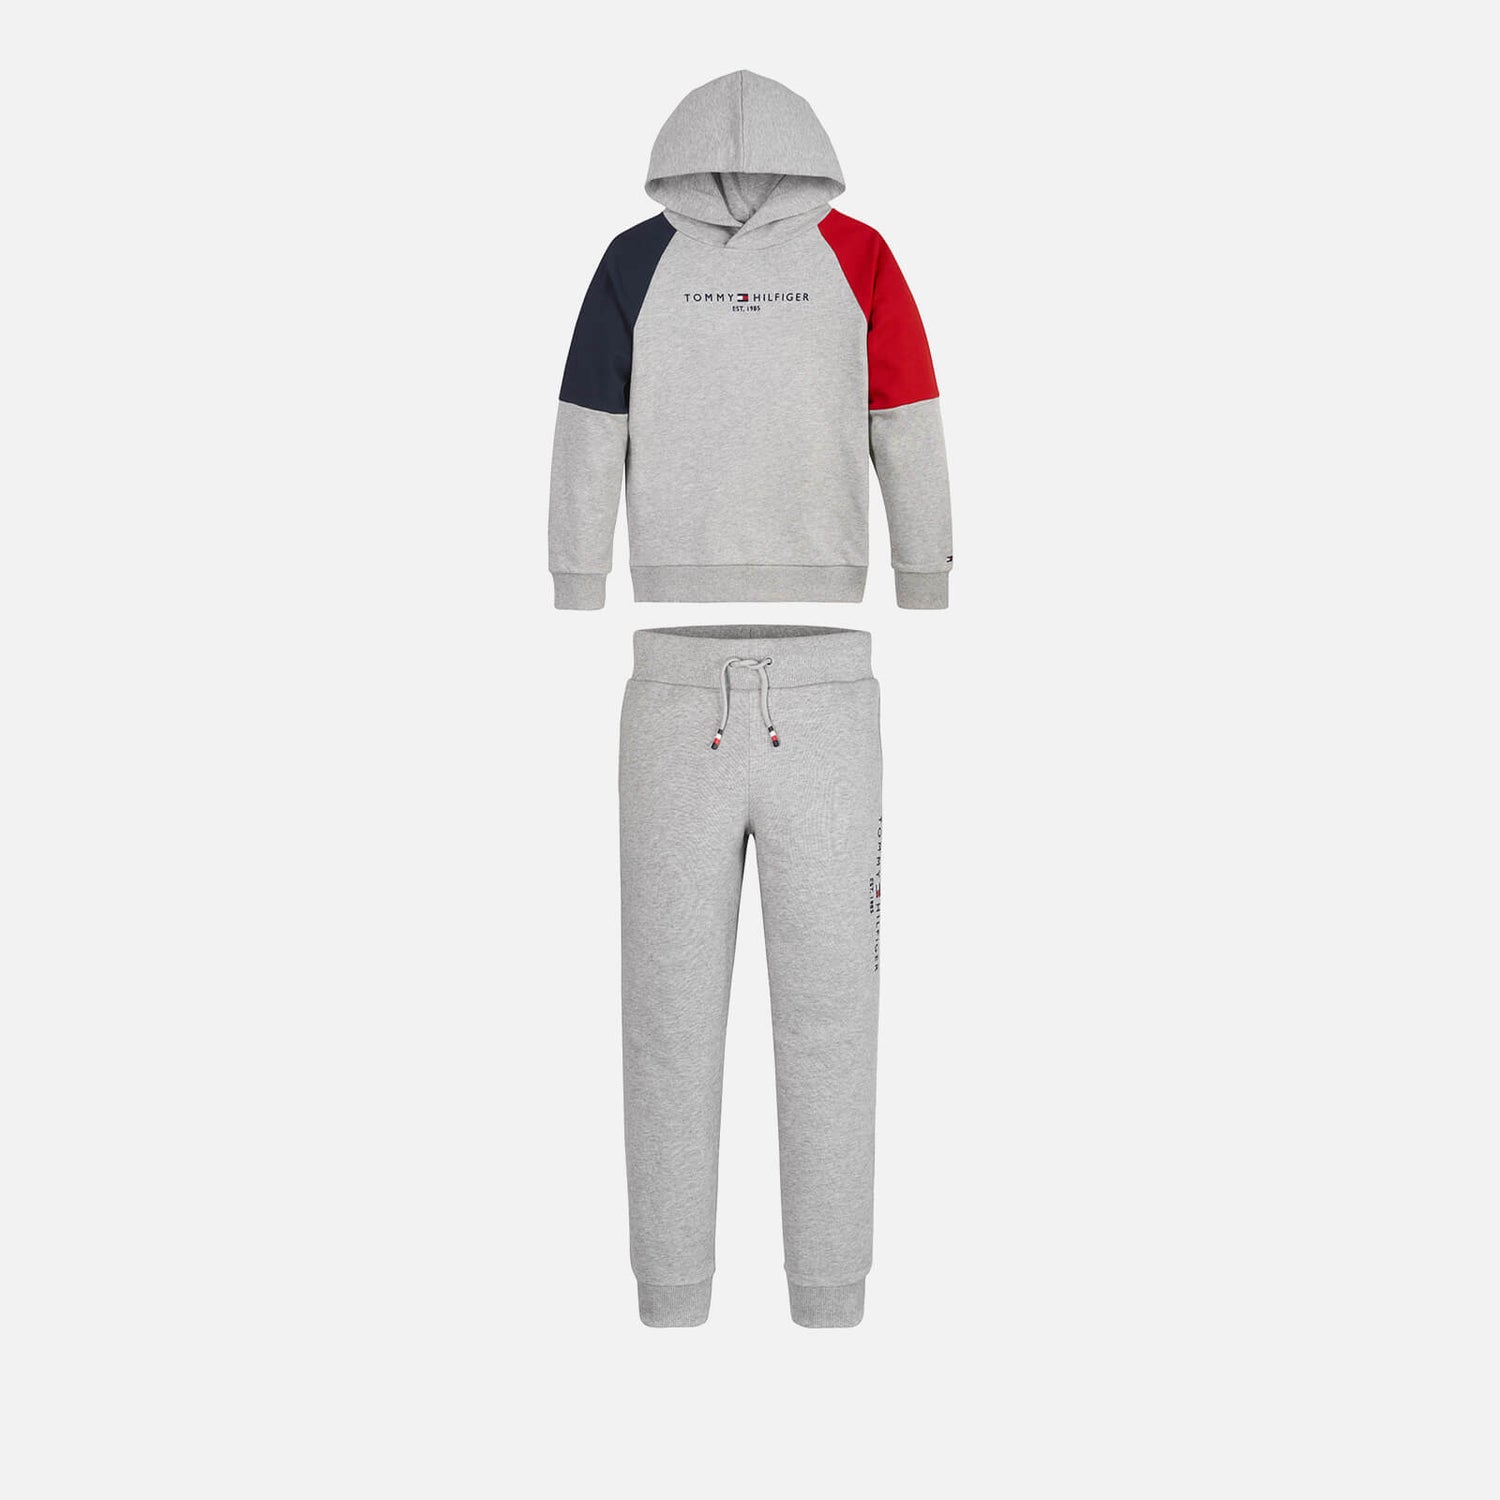 Tommy Hilfiger Boys’ Essential Cotton-Jersey Hoodie and Jogging Bottoms Set